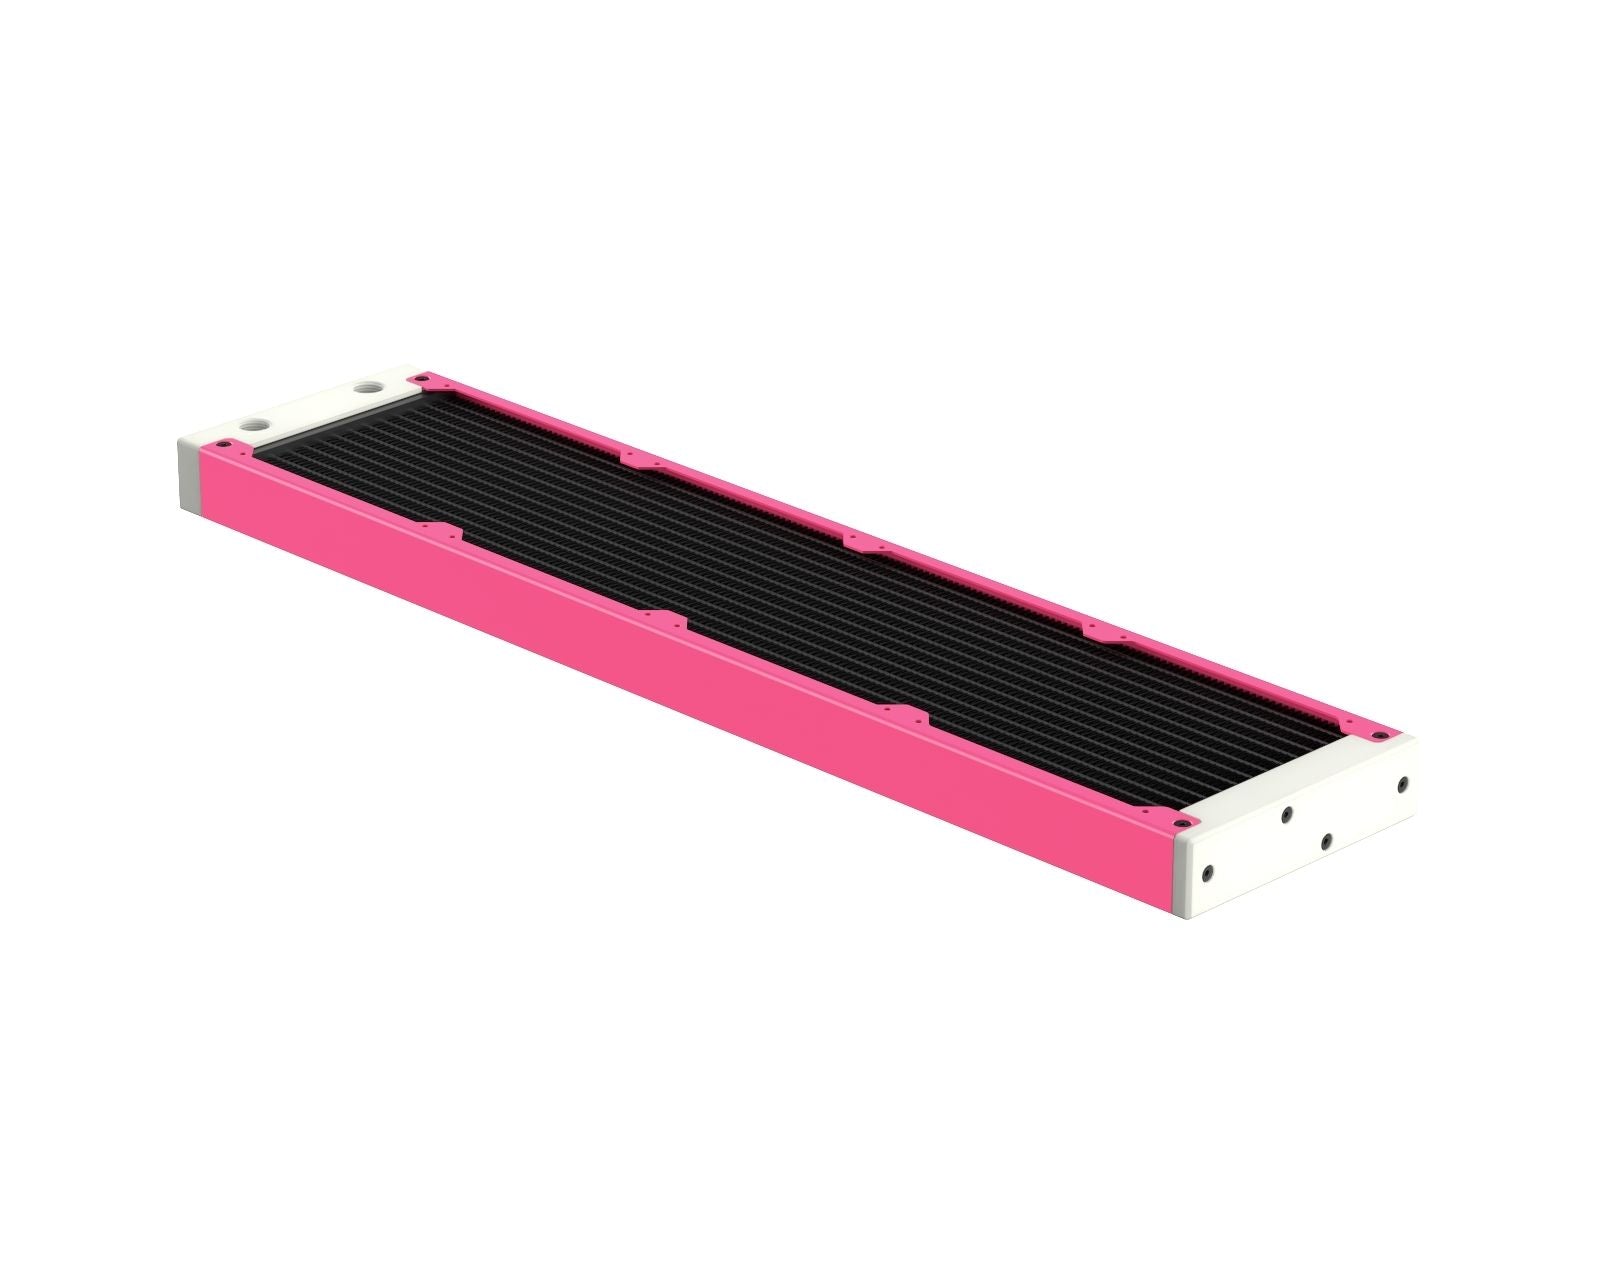 PrimoChill 480SL (30mm) EXIMO Modular Radiator, White POM, 4x120mm, Quad Fan (R-SL-W48) Available in 20+ Colors, Assembled in USA and Custom Watercooling Loop Ready - UV Pink